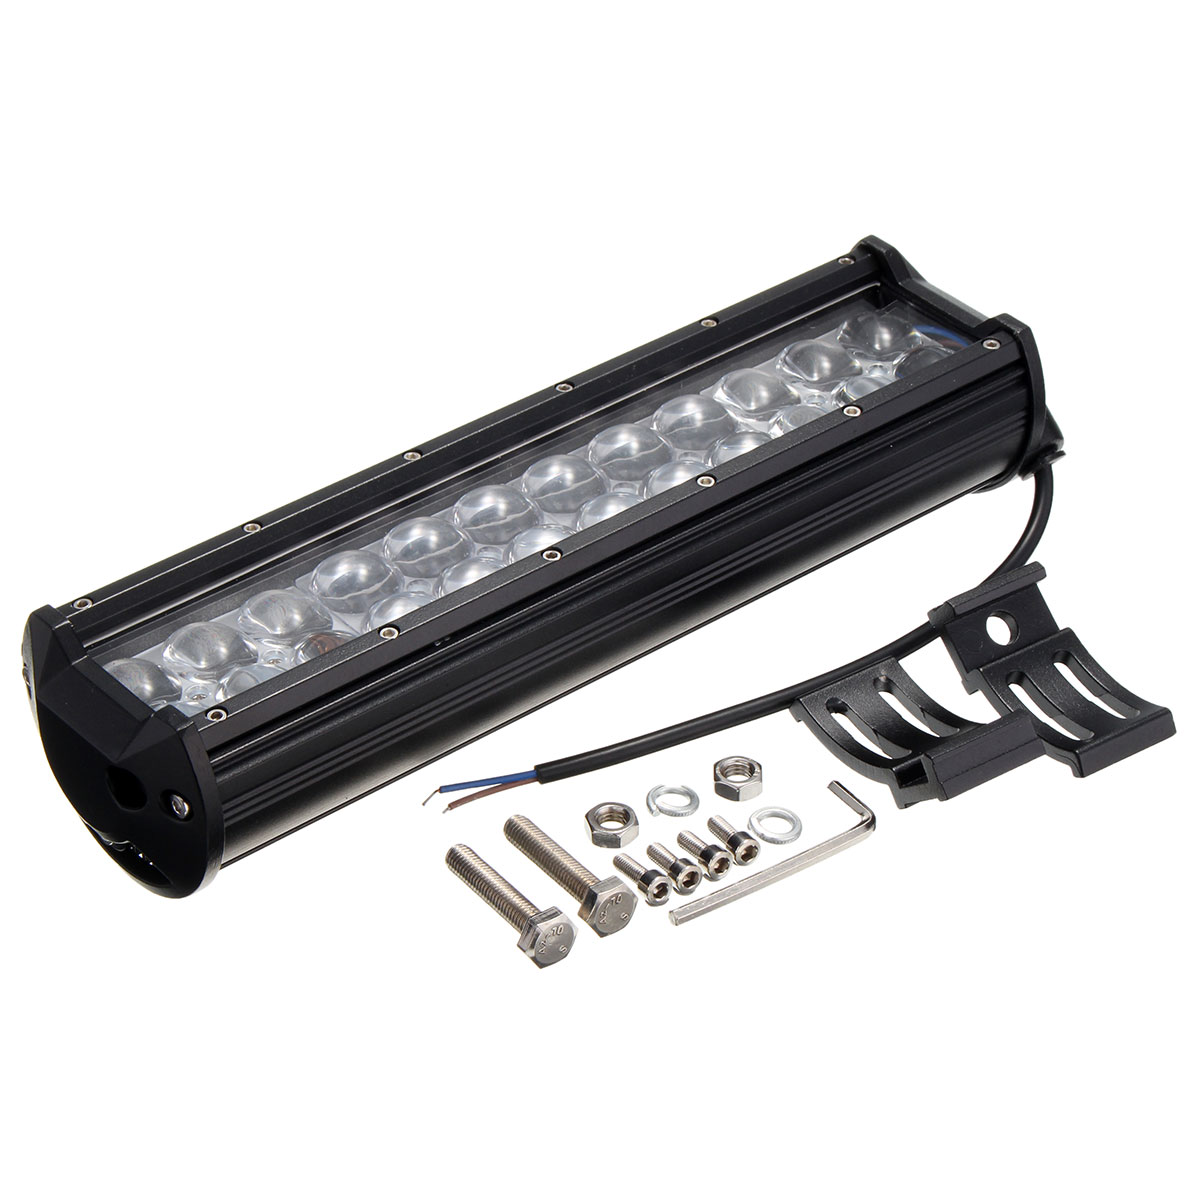 11inch-72W-24LED-Spot-Flood-Lamp-Combo-Work-Light-Bar-For-ATV-SUV-Jeep-Truck-Off-Road-1052794